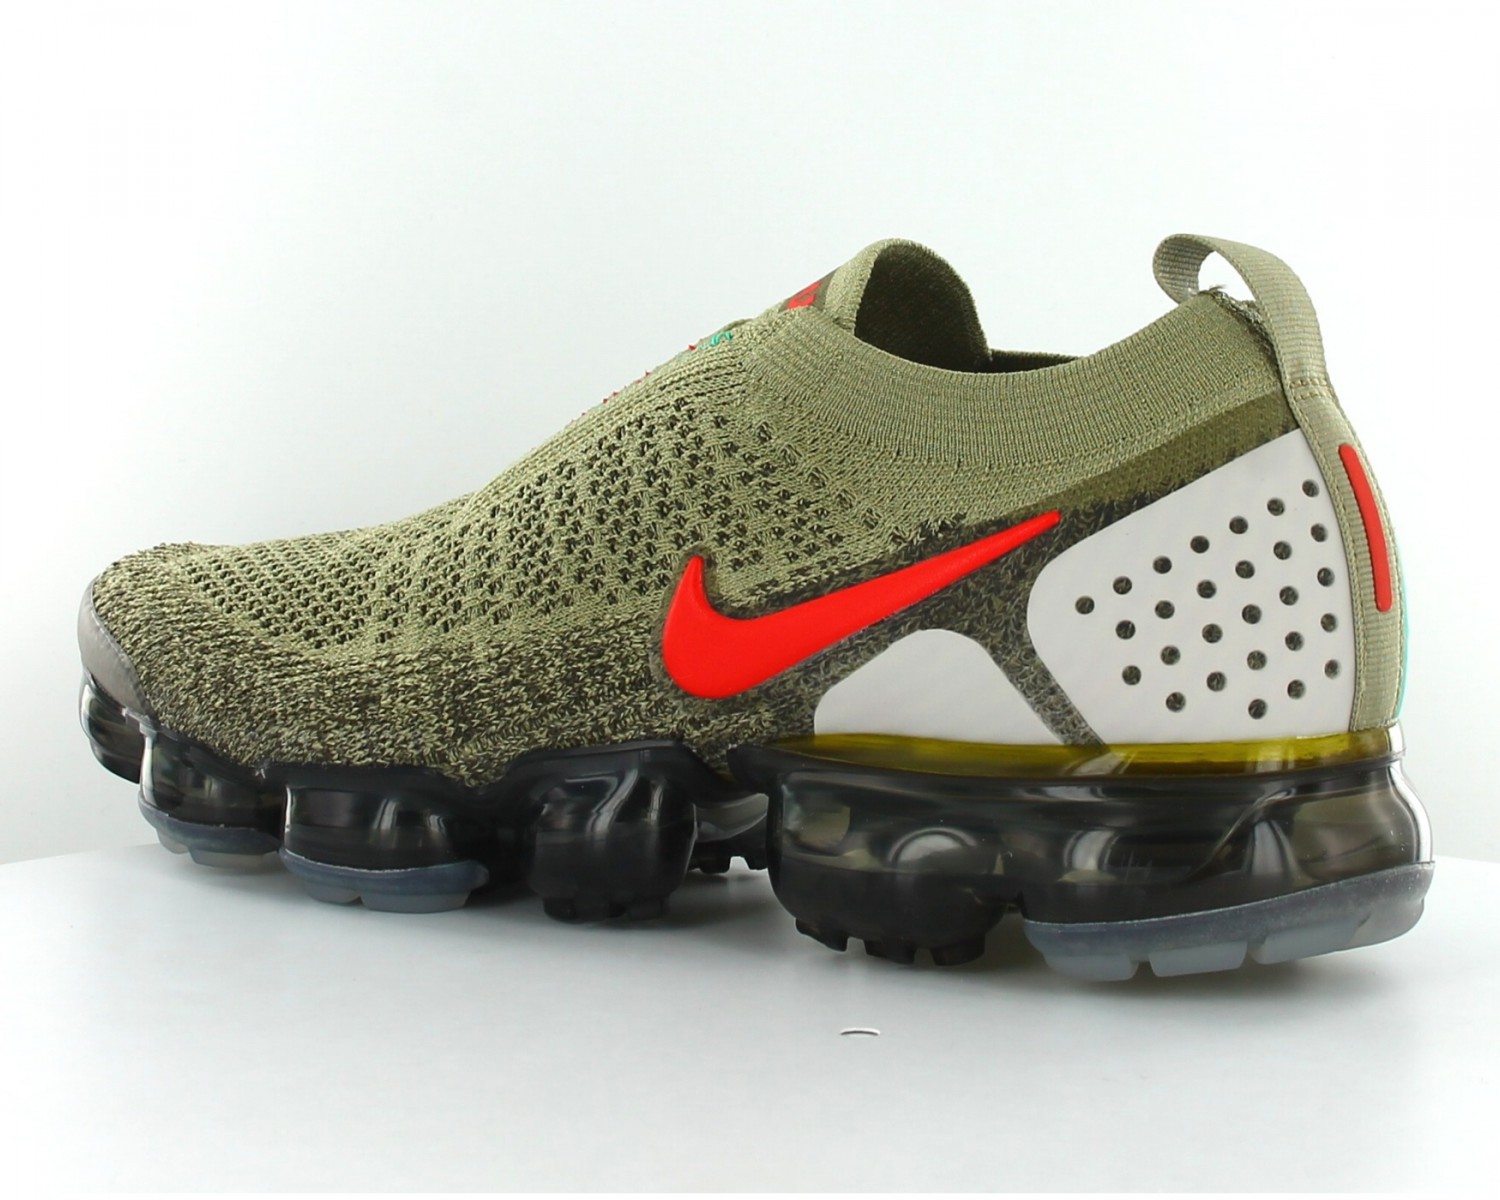 air vapormax moc 2 neutral olive habanero red